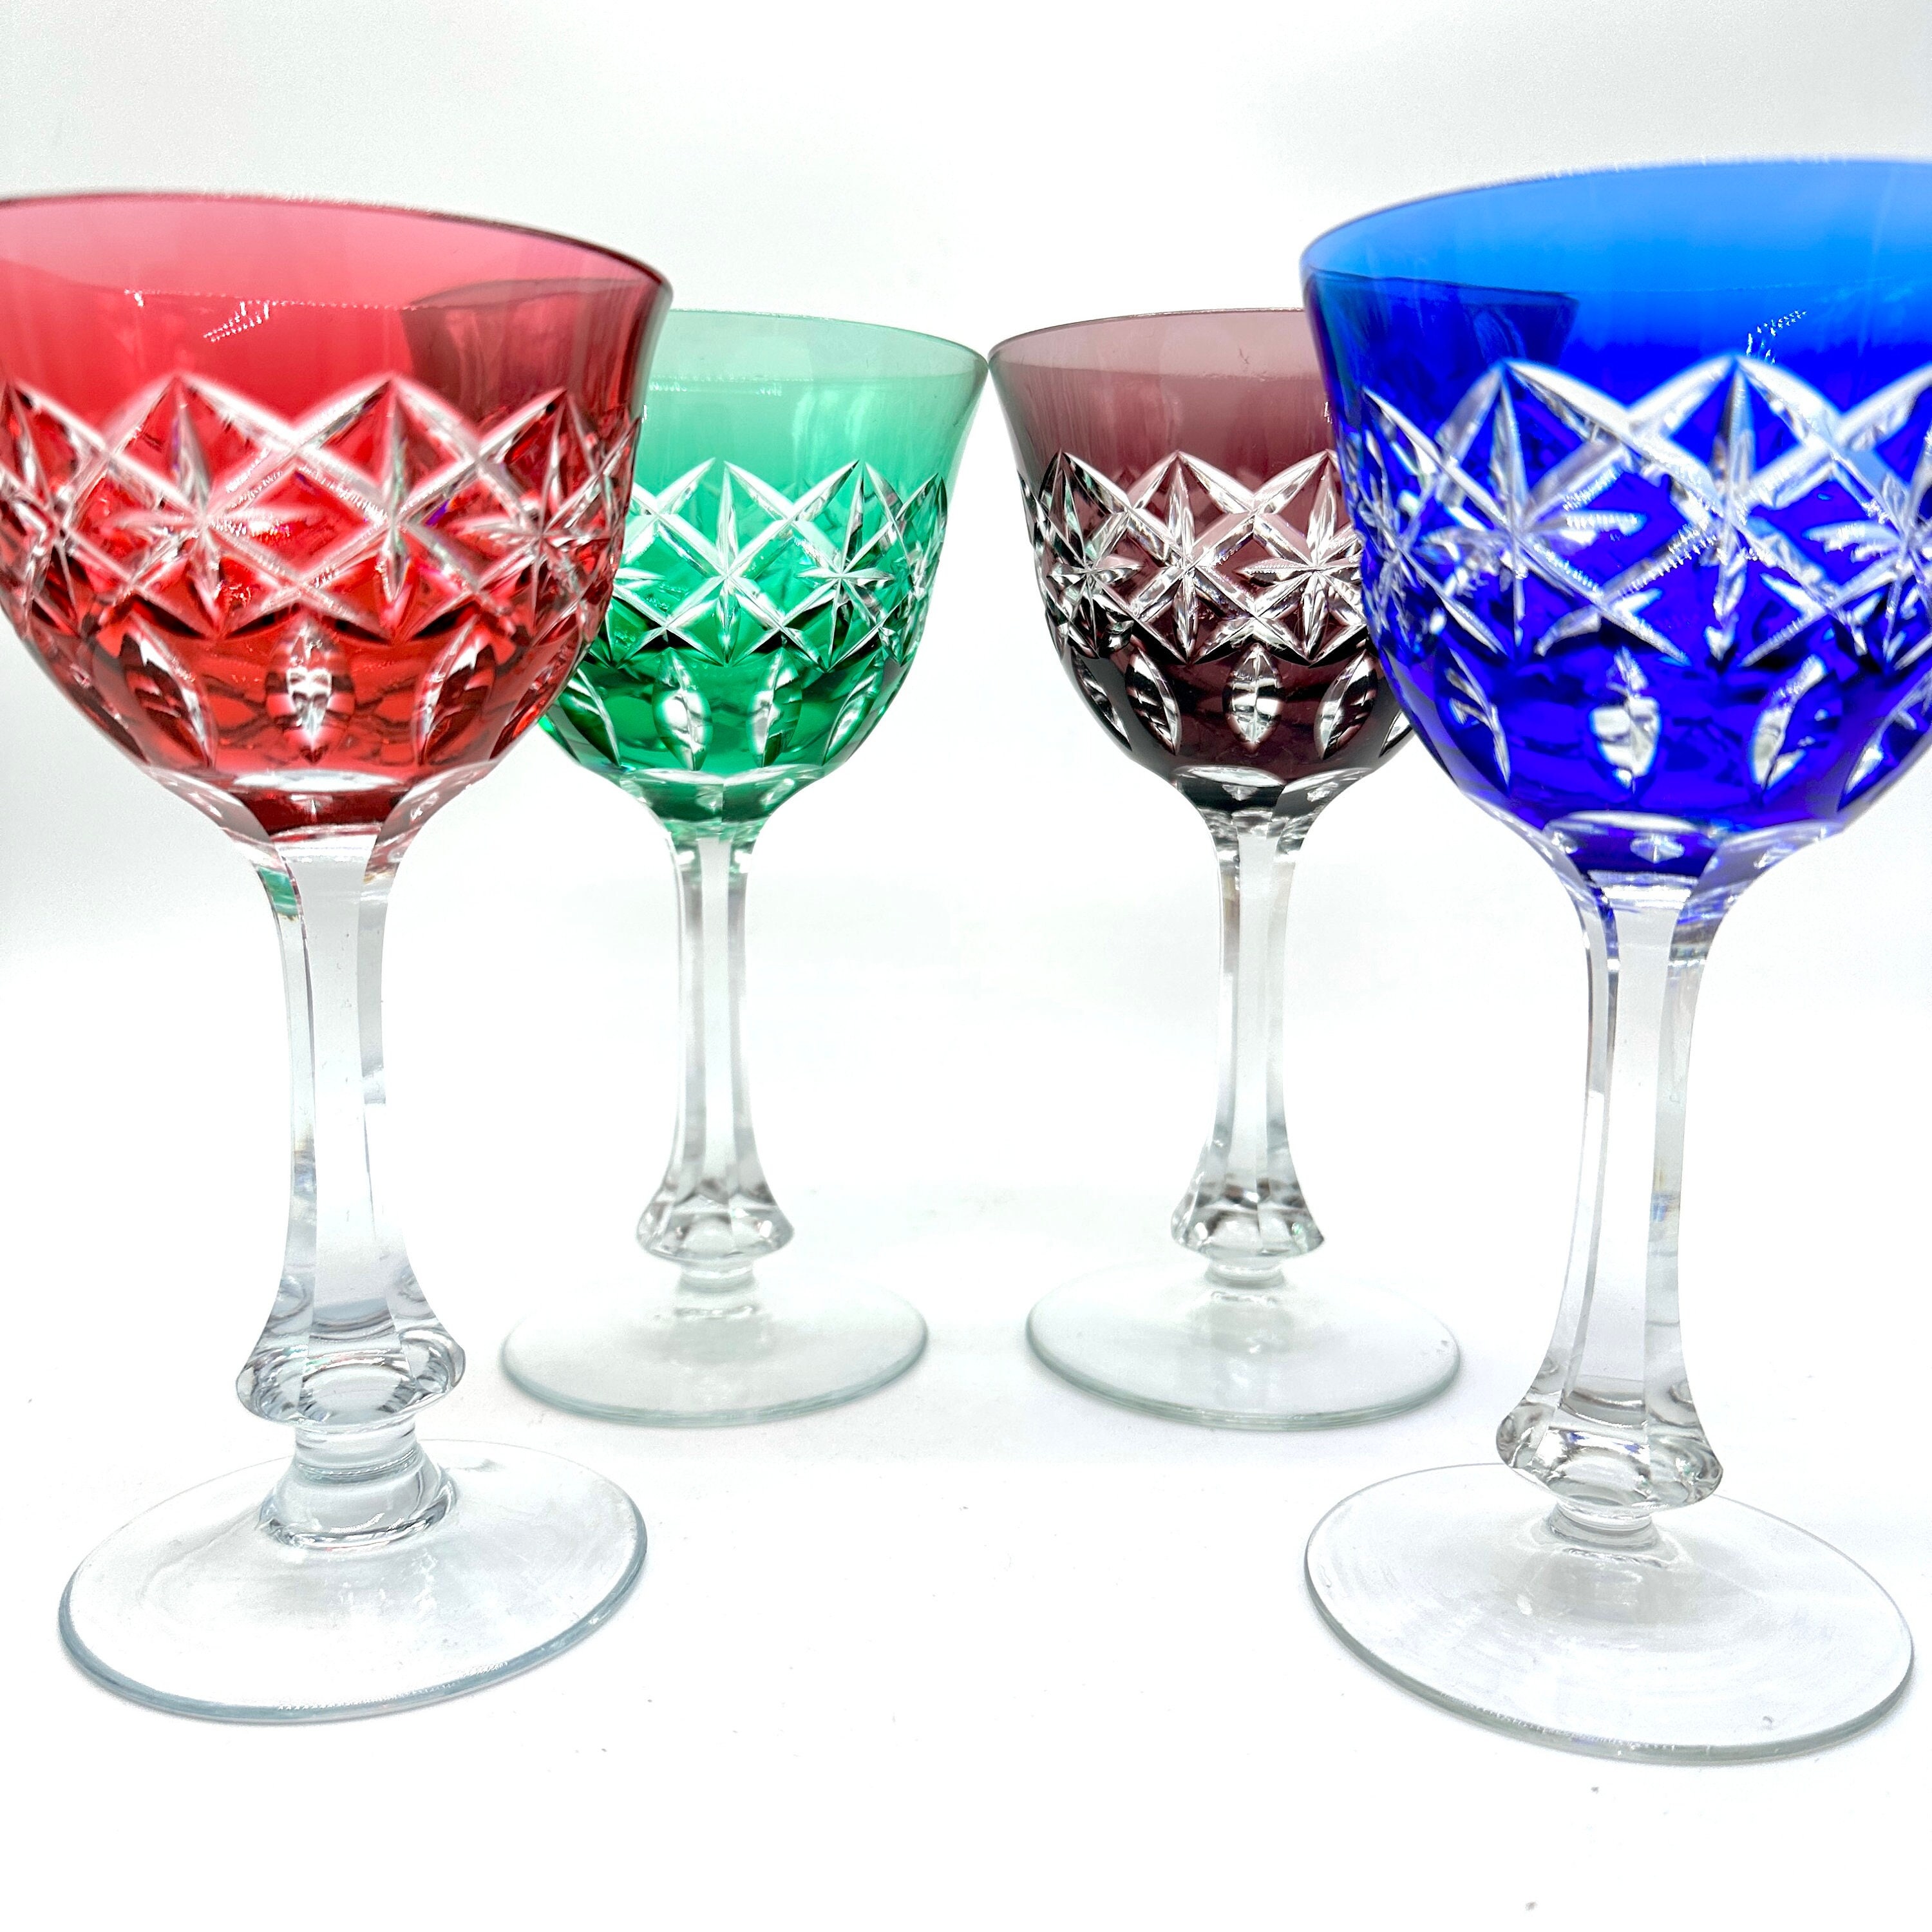 Viski Reserve Nouveau Seaside Collection Multi-Colored Wine Glasses with  Stems - Crystal Wine Glasses Colorful Glassware - 22oz Long Stem Wine  Glasses Set of 4